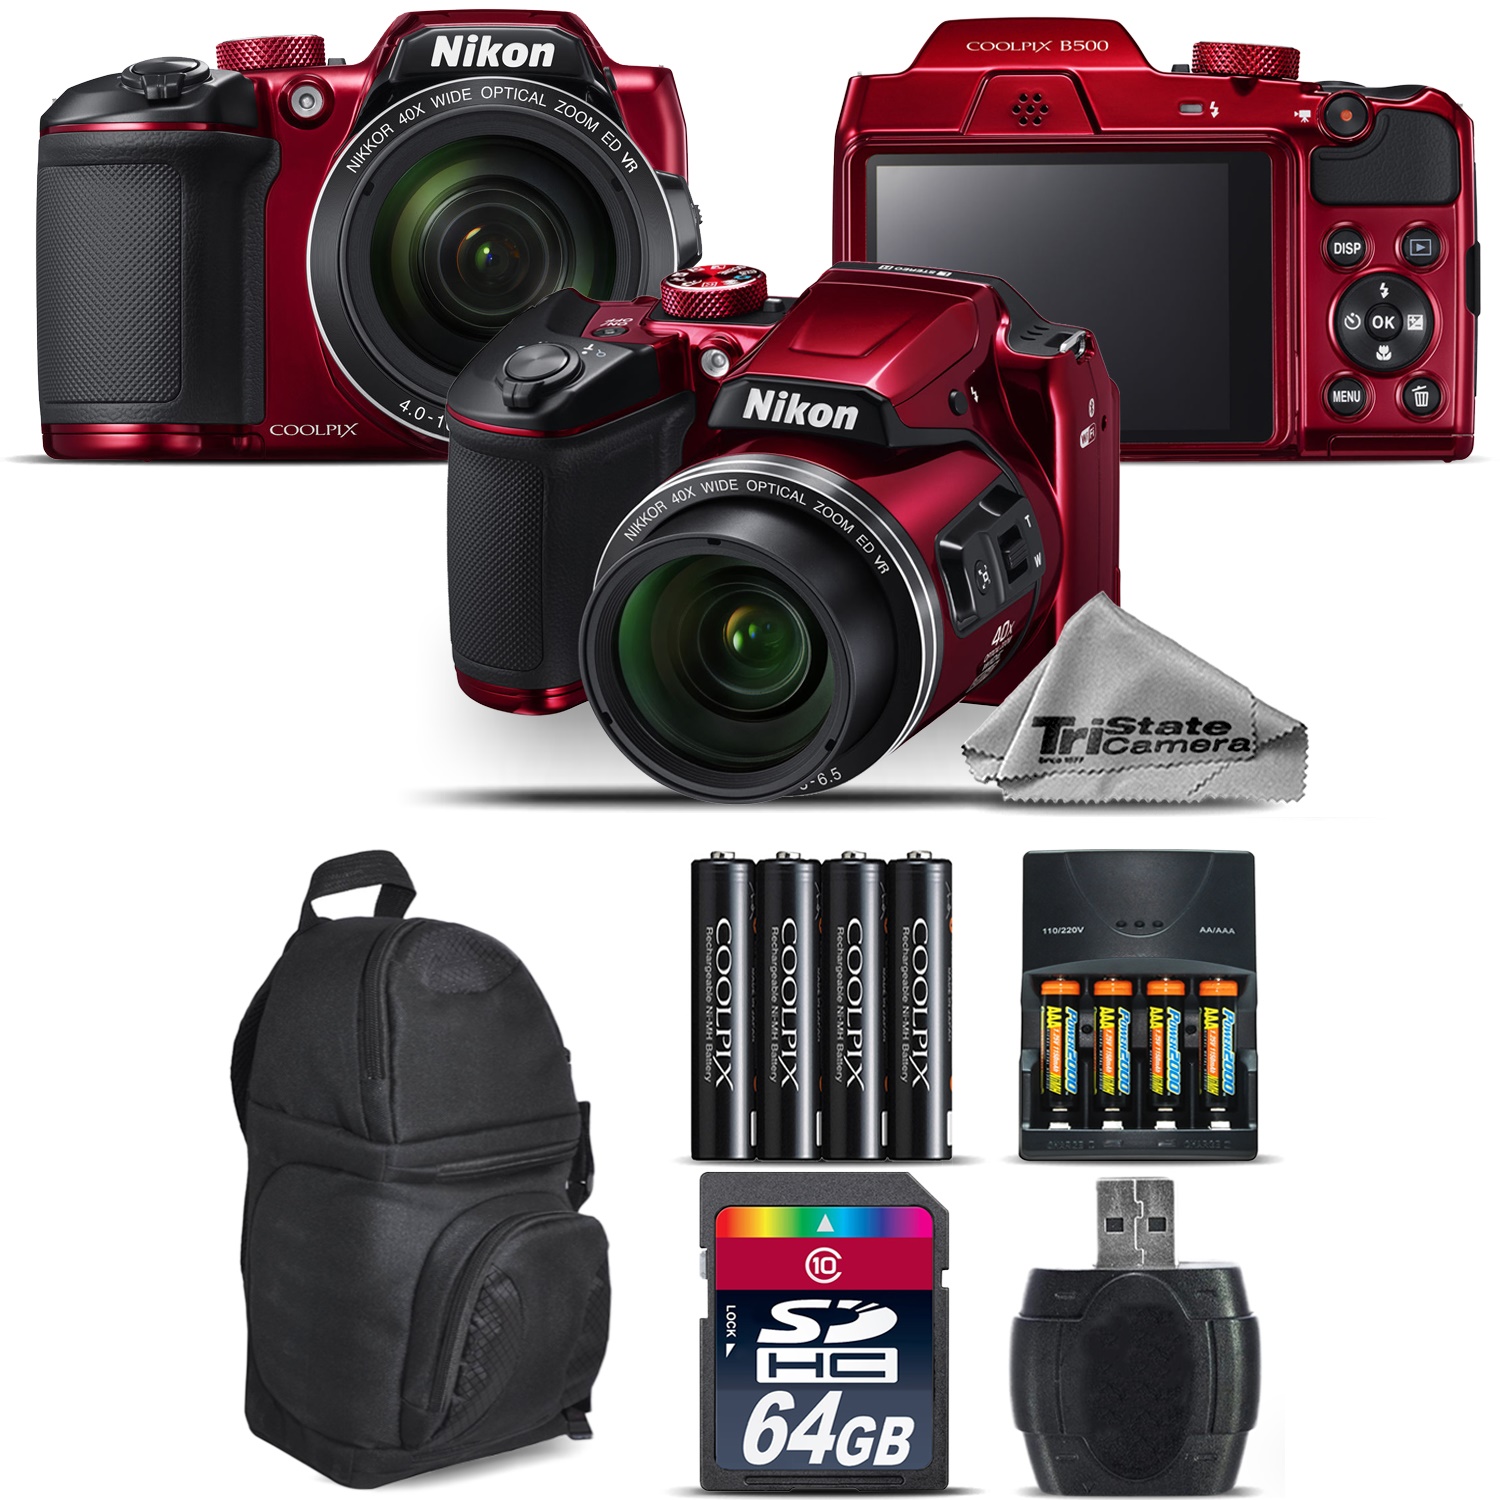 COOLPIX B500 RED Camera 40x Zoom + Extra Battery + Backpack - 64GB Bundle *FREE SHIPPING*